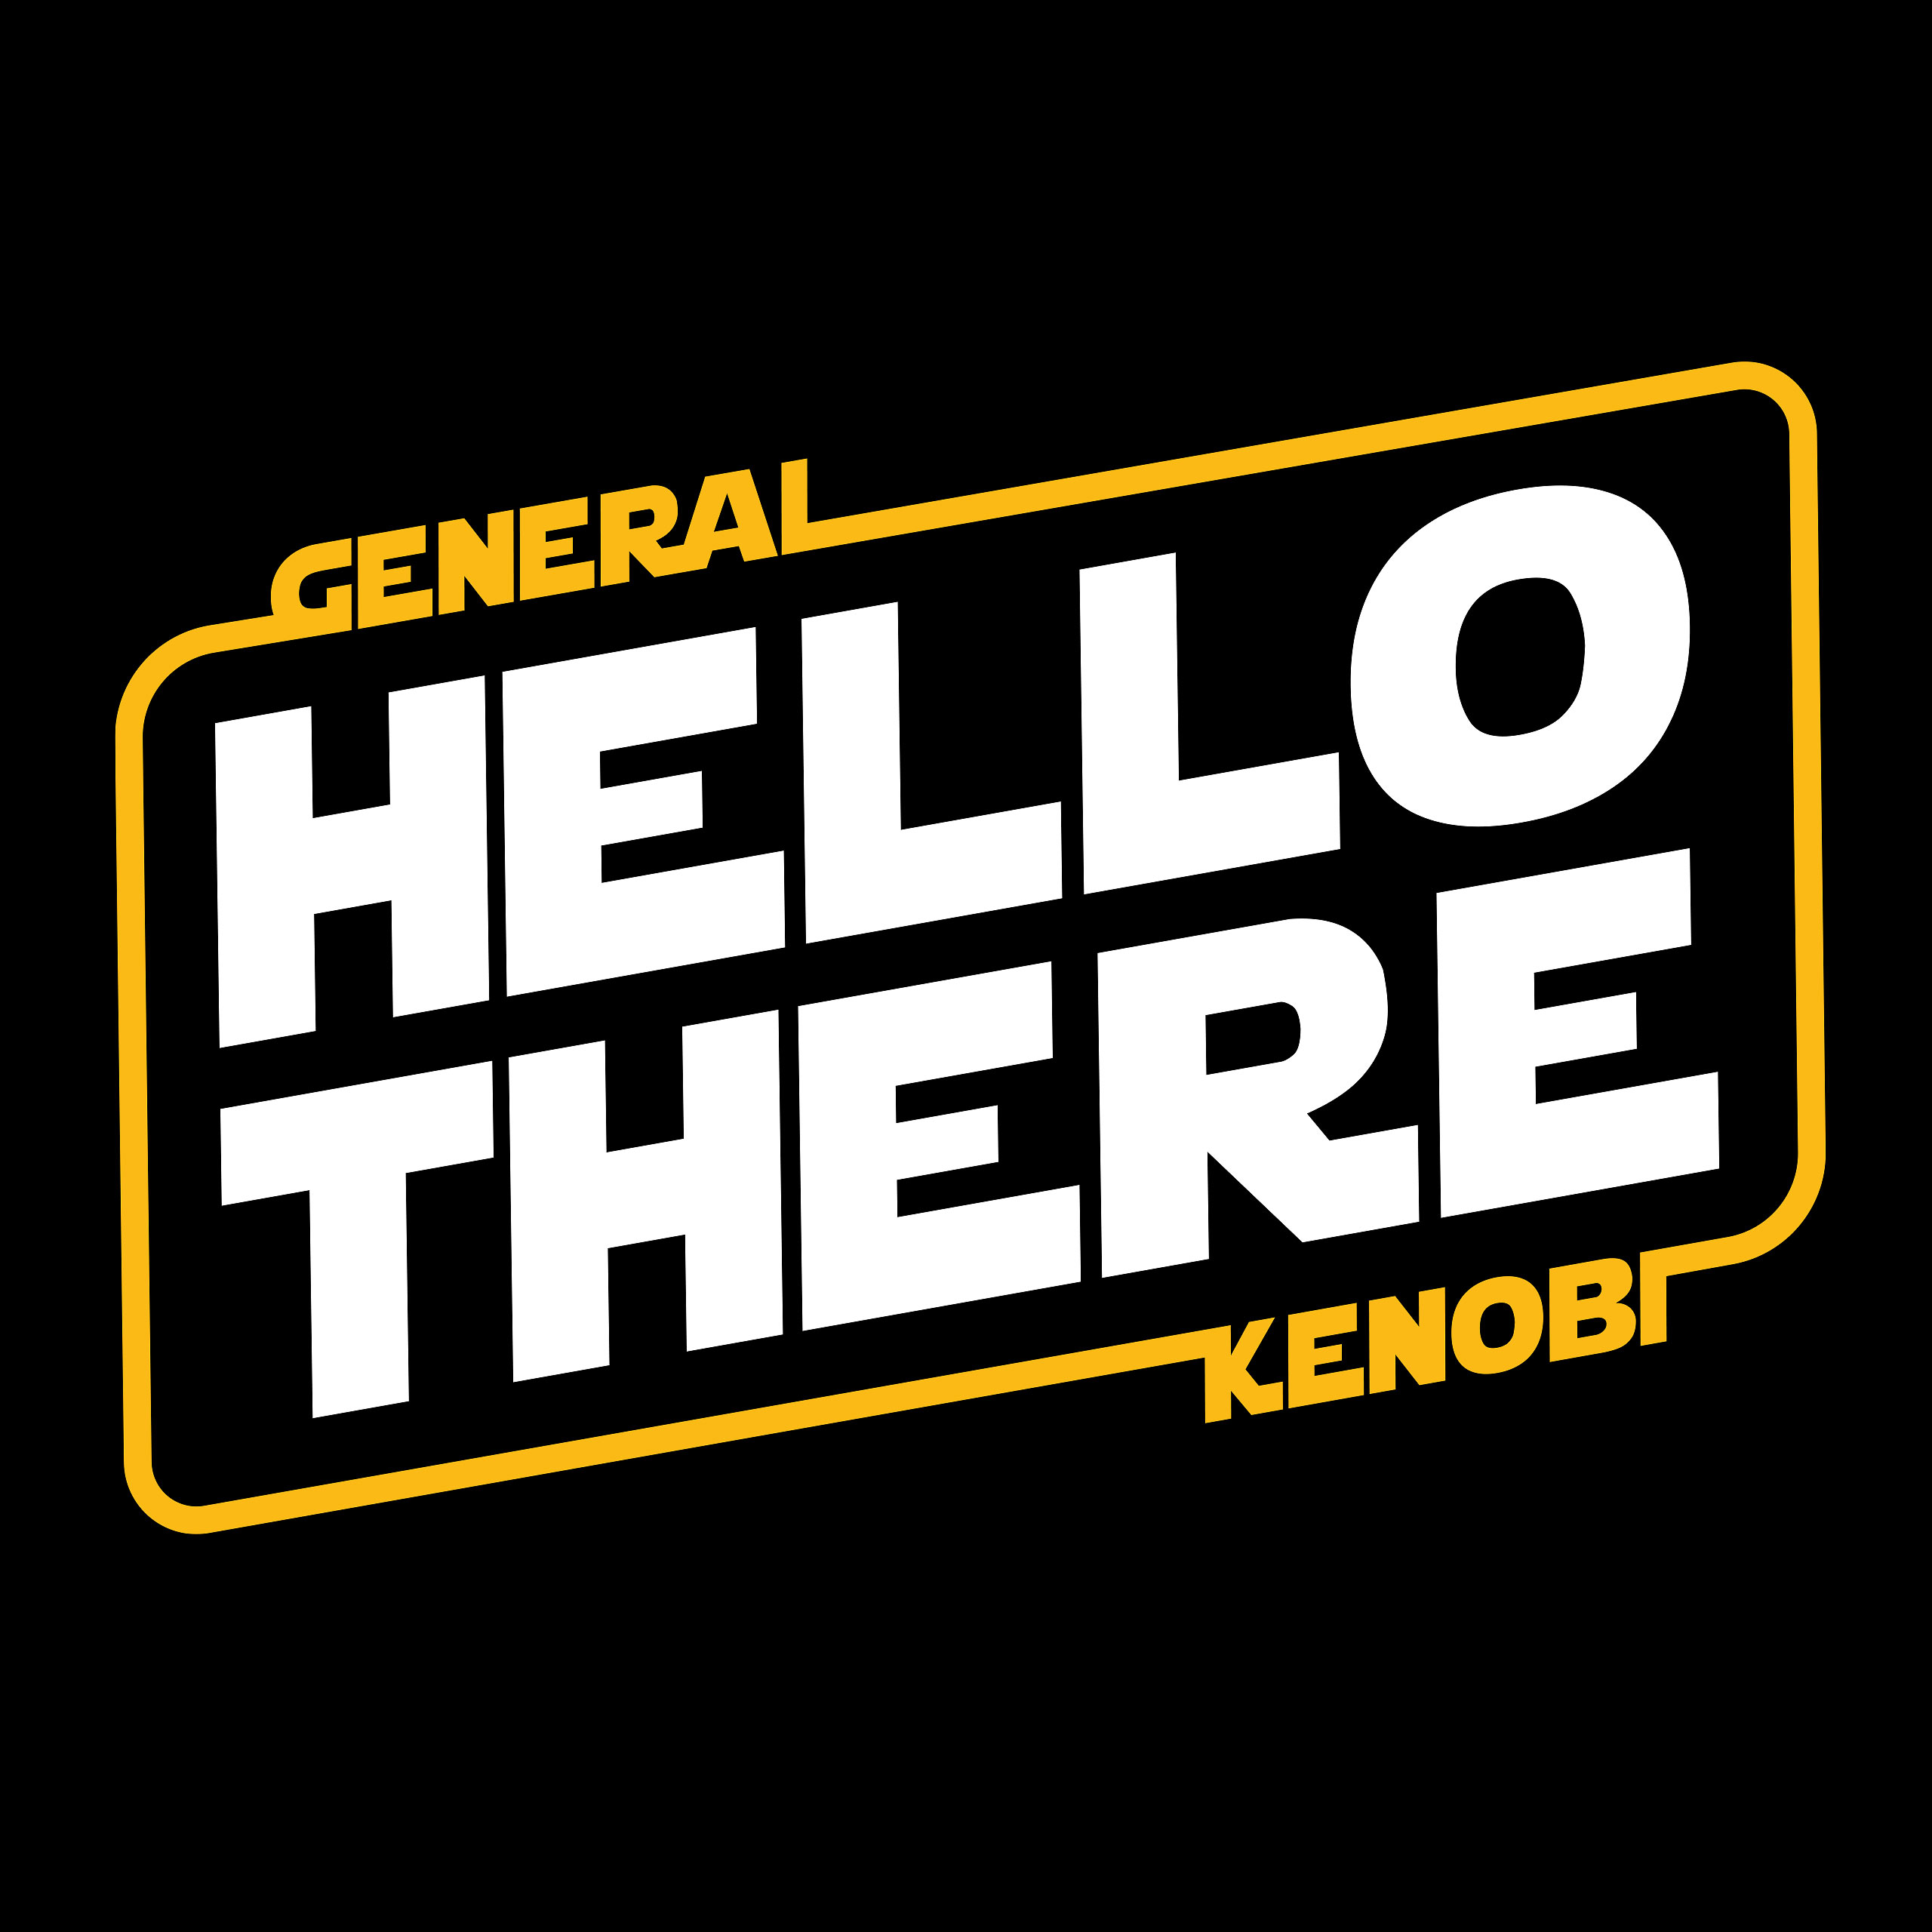 General Kenobi Hello There T-Shirt for Star Wars Fans Black